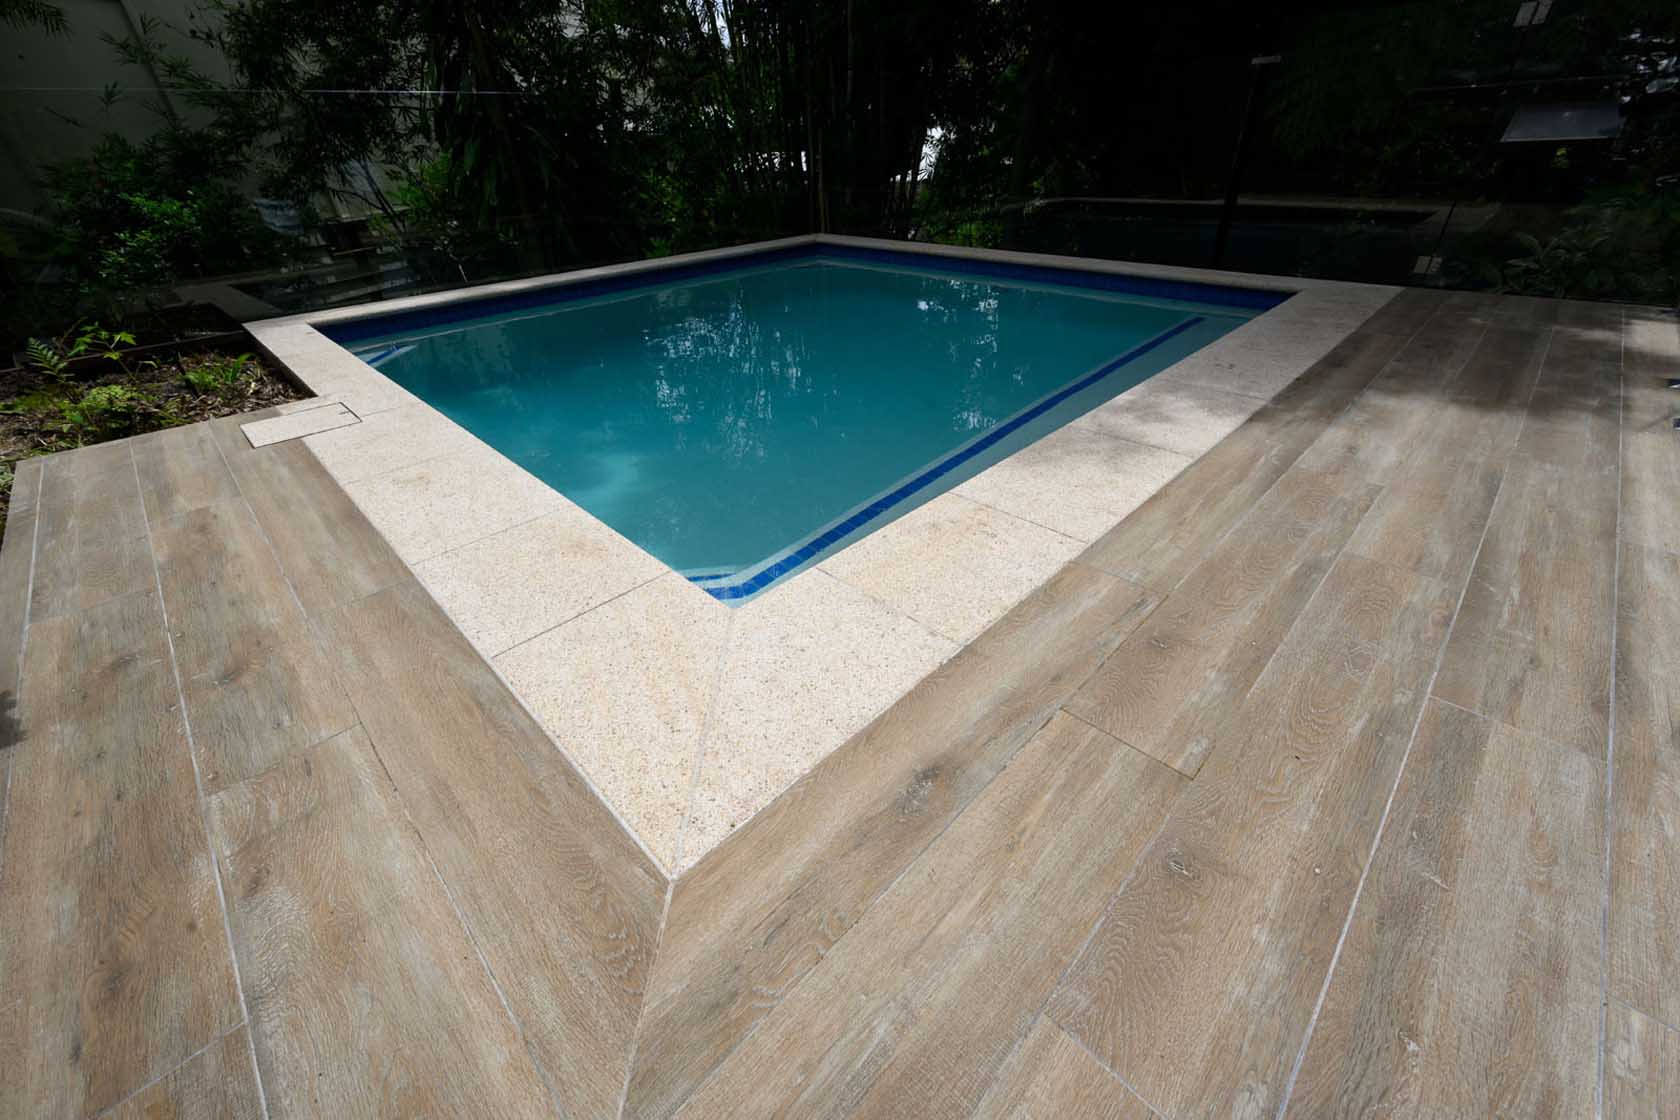 CM148 Pacific Blue waterline with Almond Granite coping and Oak TileDeck